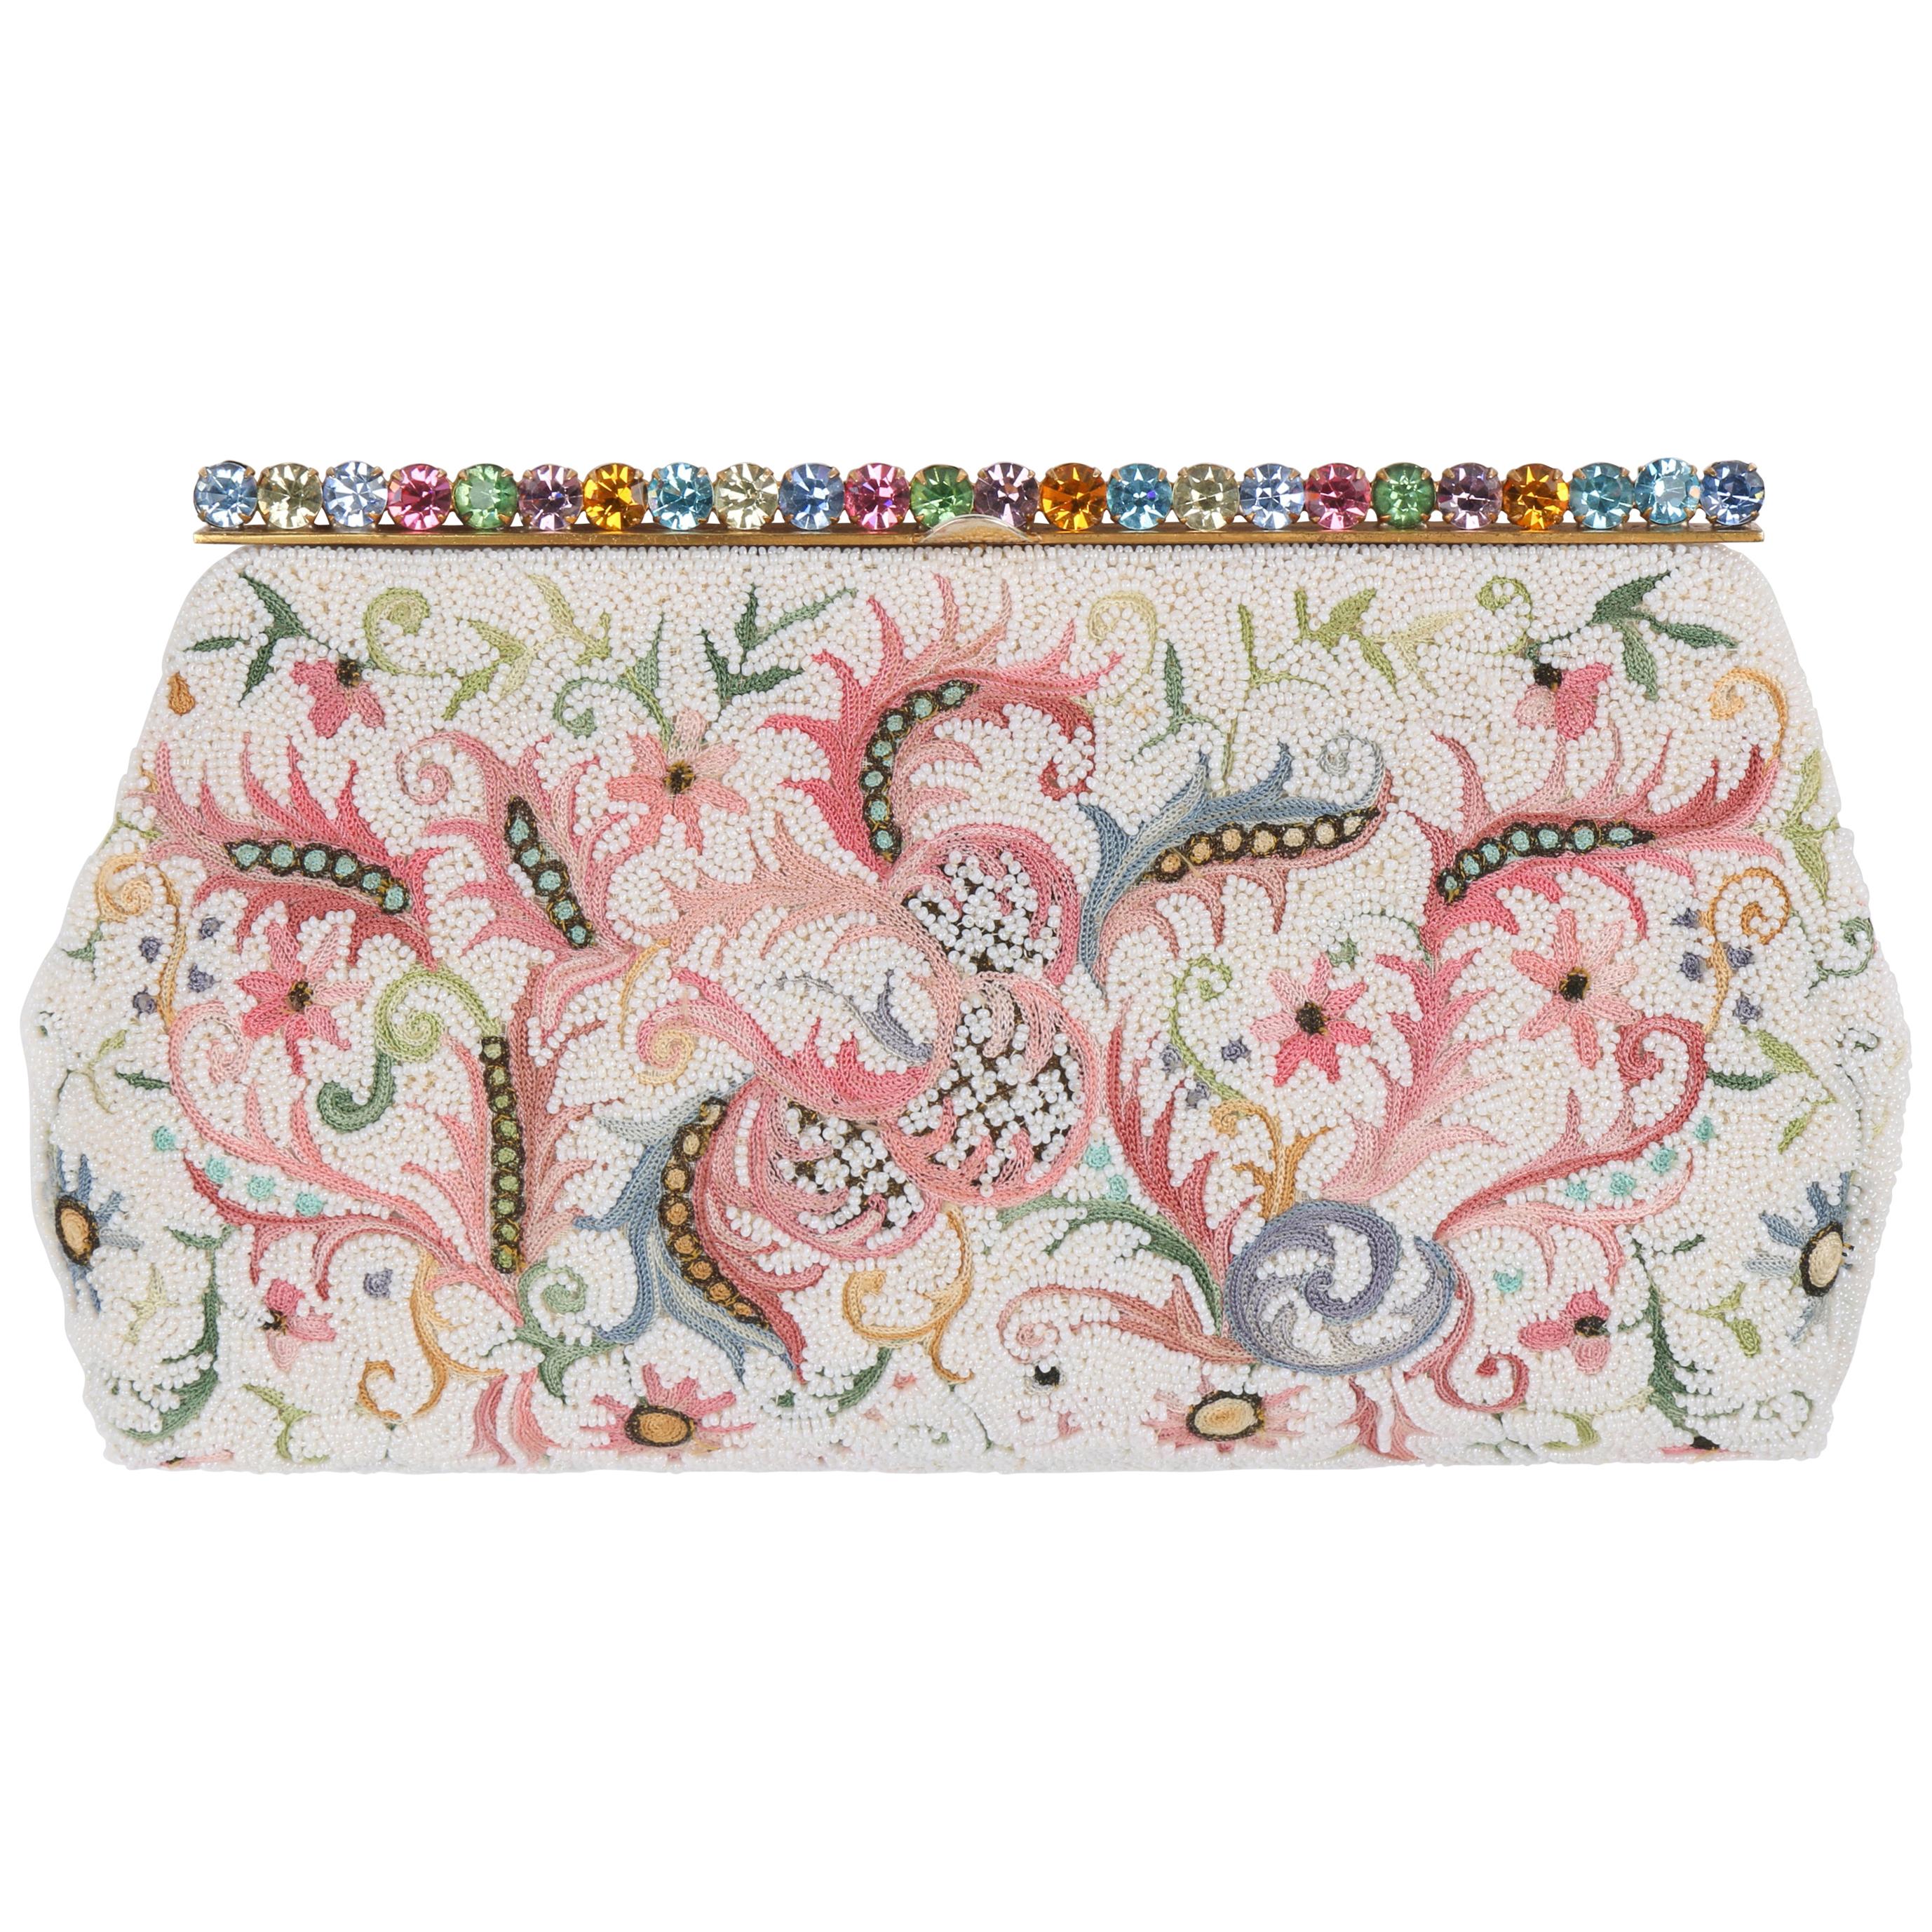 BAGS BY JOSEF c.1940's Floral Point De Beauvais Glass Beaded Frame Top Clutch